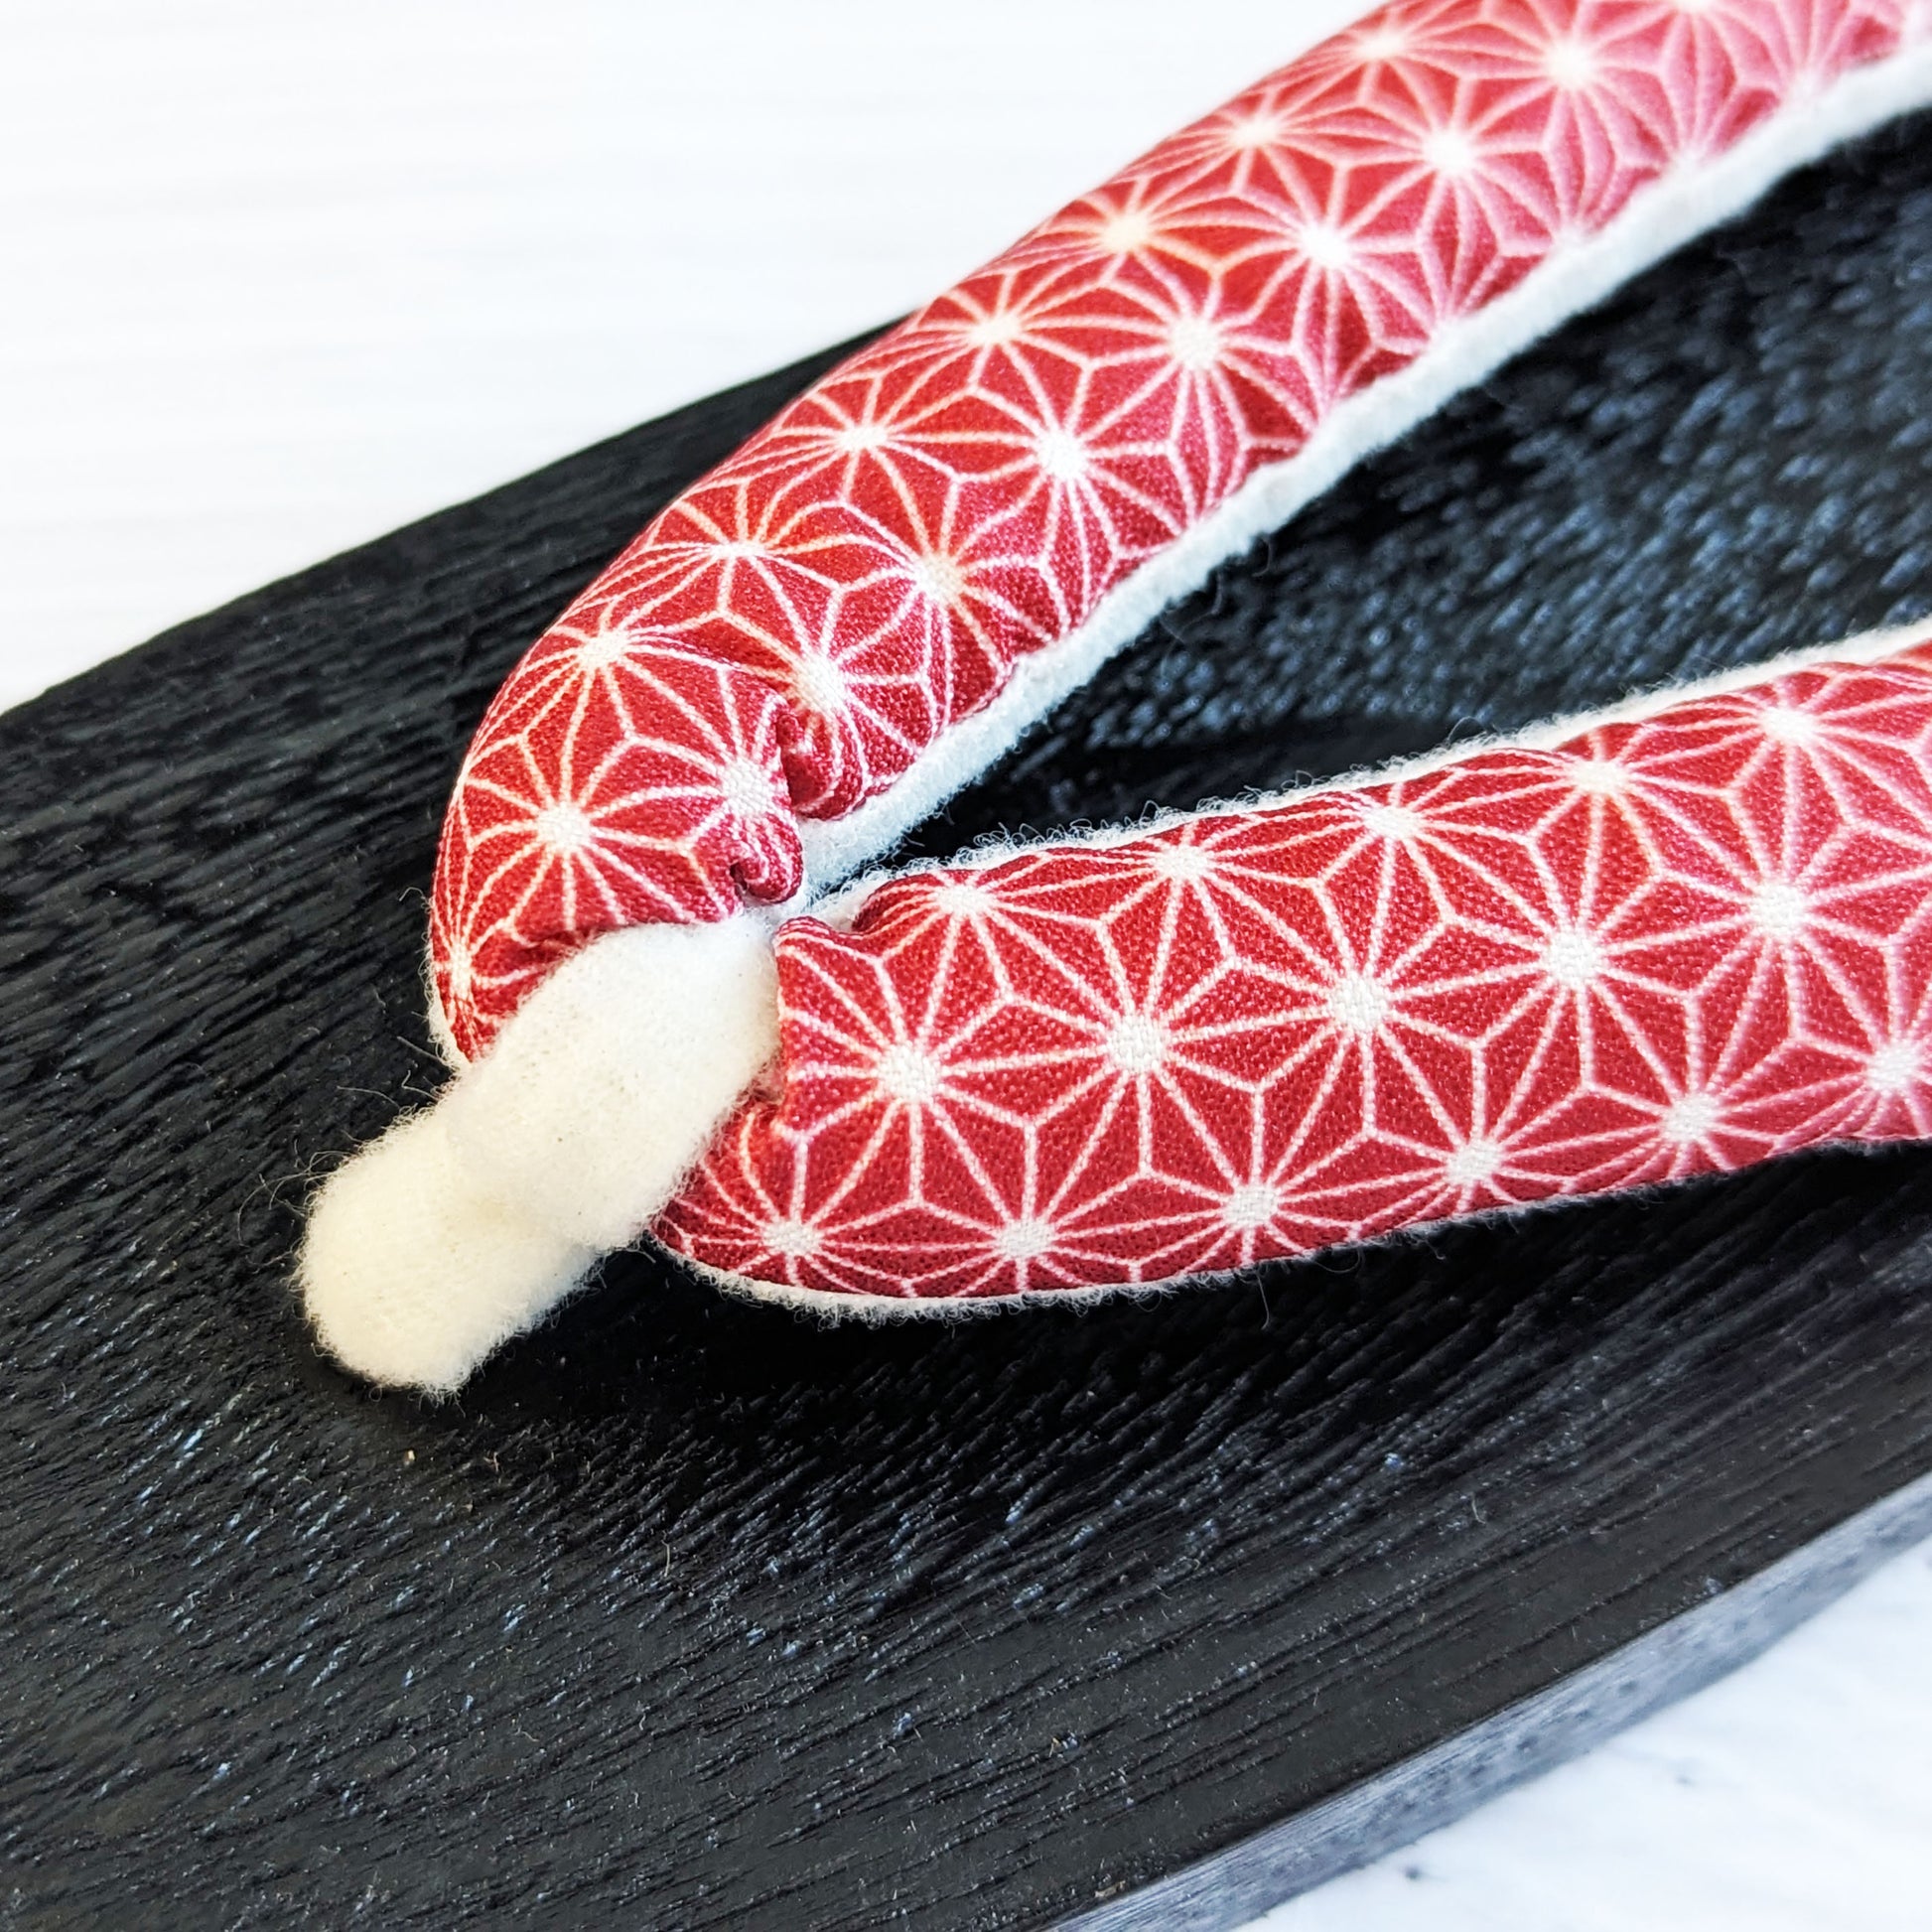 Japanese Geta Sandals - Patterned Red